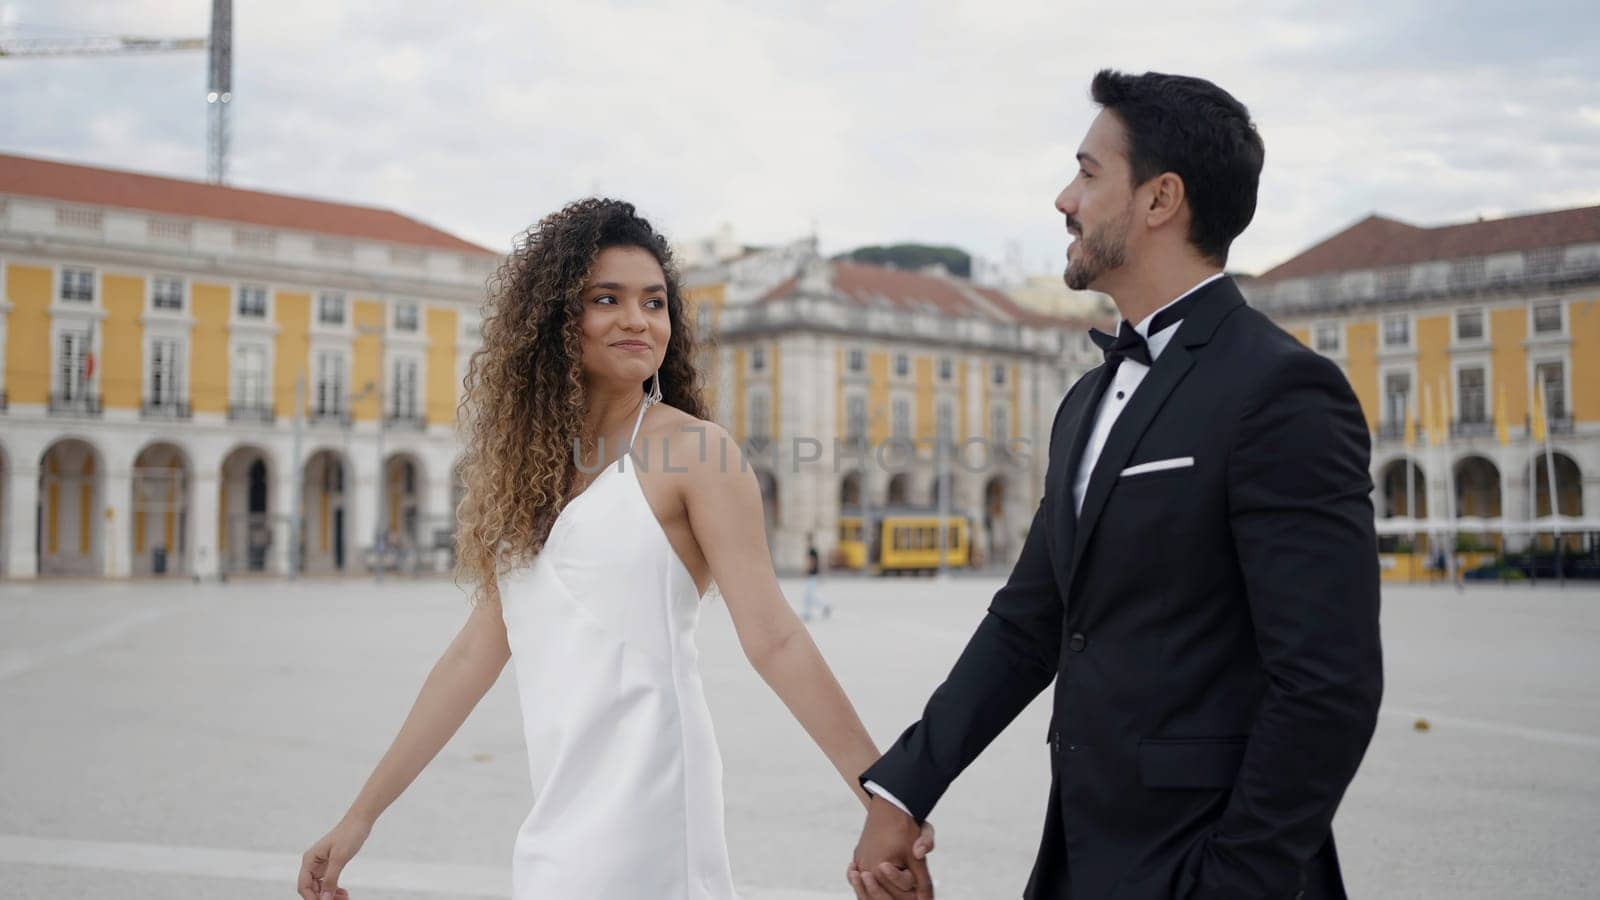 Young and beautiful couple walking along historic buildings and talking. Action. Man in suit and woman in white dress holding hands in the city square. by Mediawhalestock